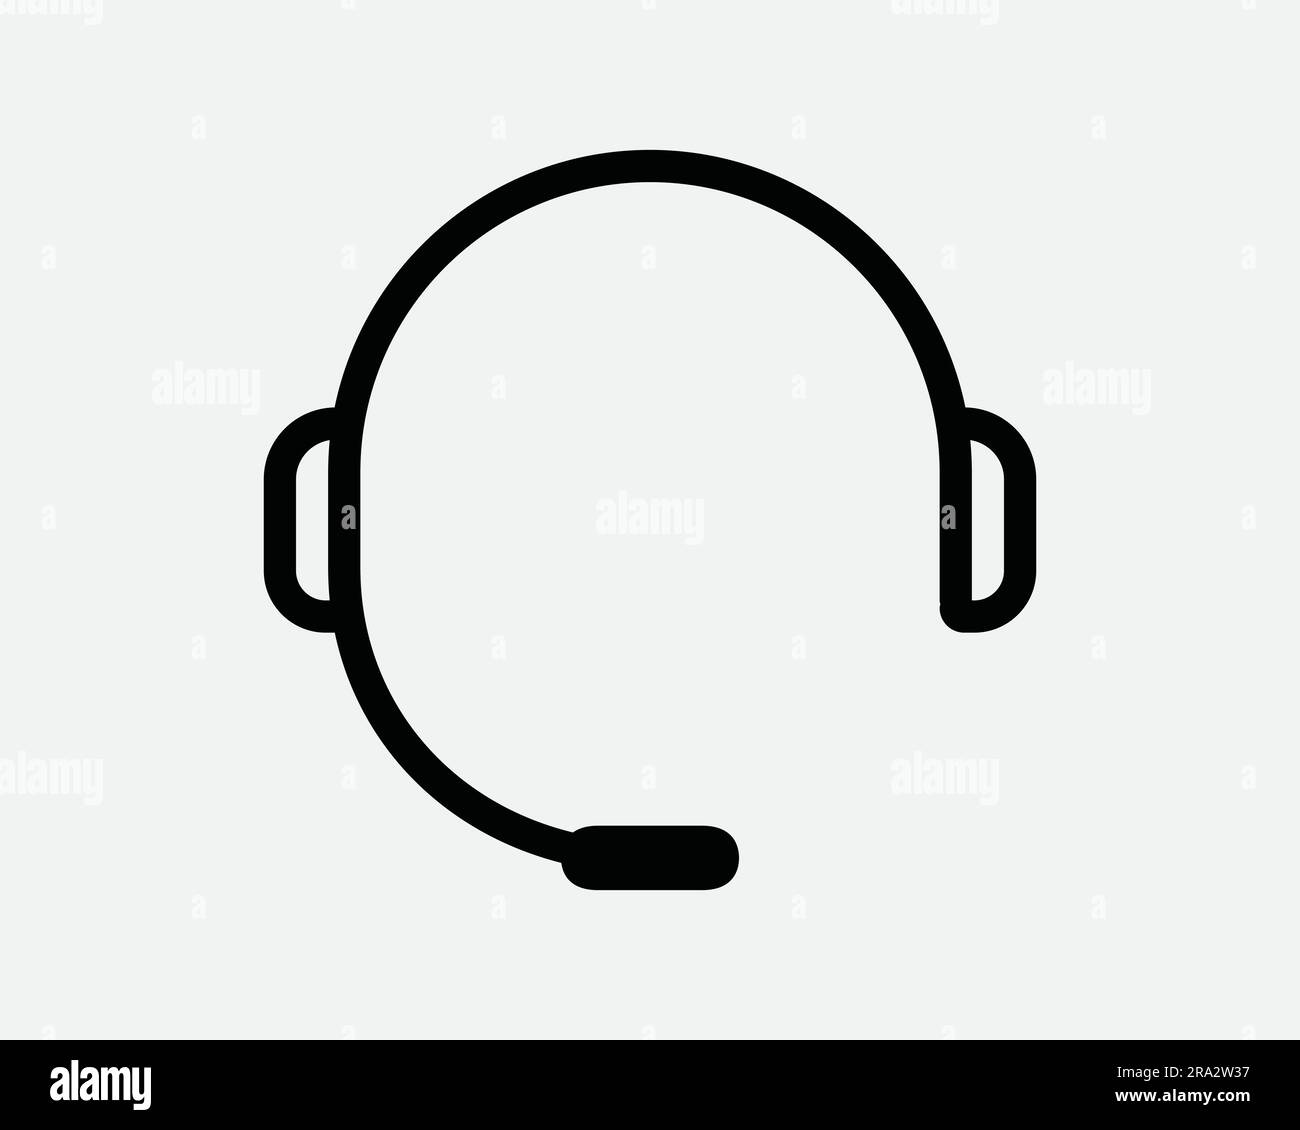 Customer Service Headset Line Icon. Headphone Head Set Phone Call Center Contact Help Game Black White Graphic Clipart Artwork Symbol Sign Vector EPS Stock Vector